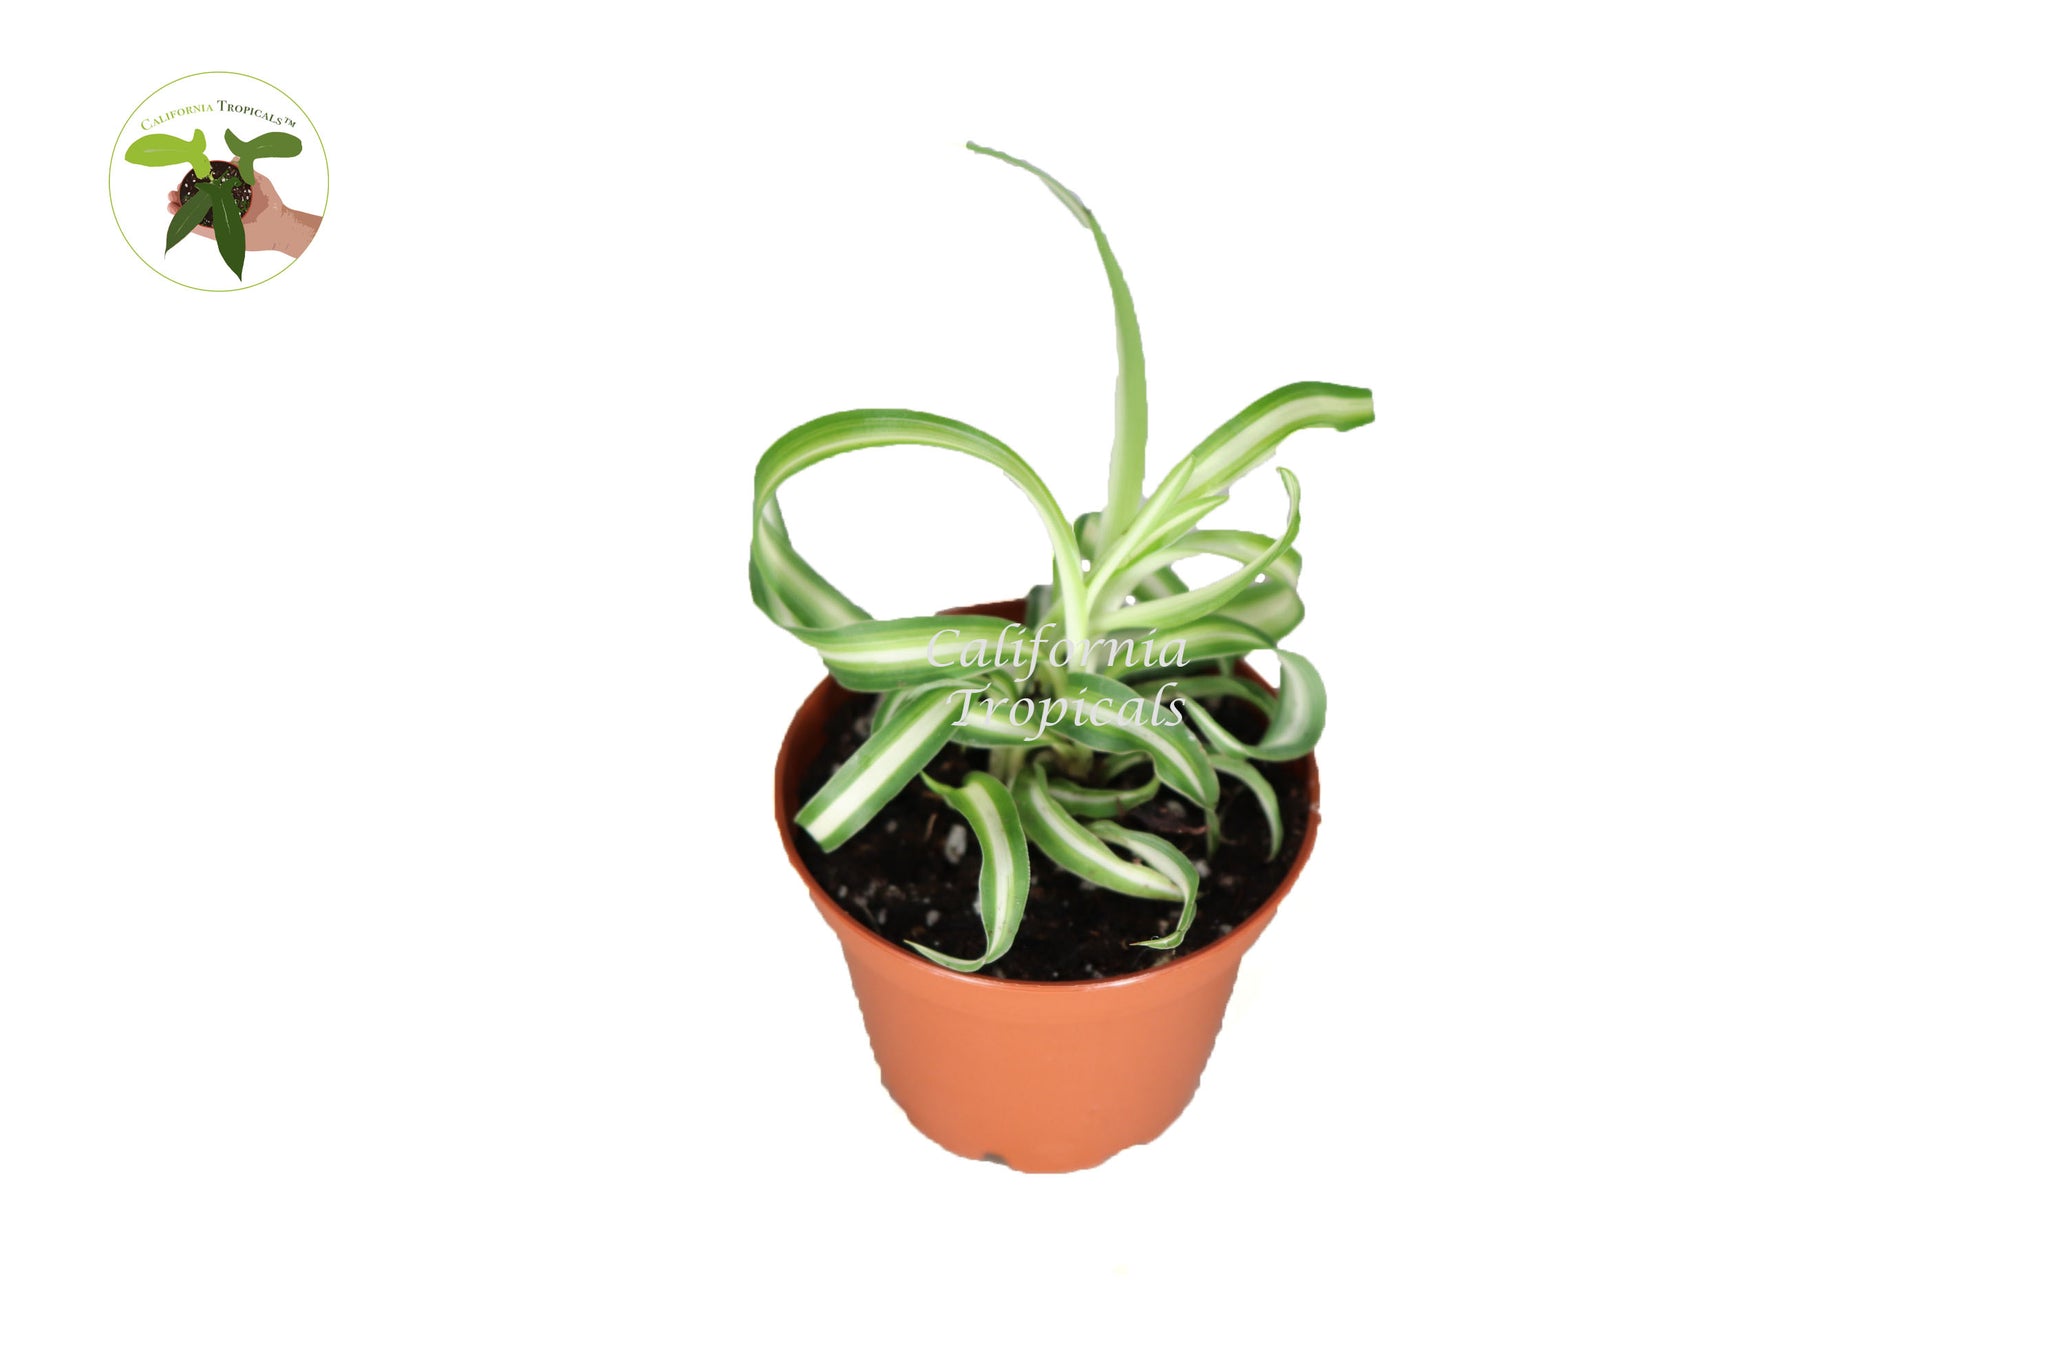 Bonnie Curly Spider Plant - 2'' from California Tropicals